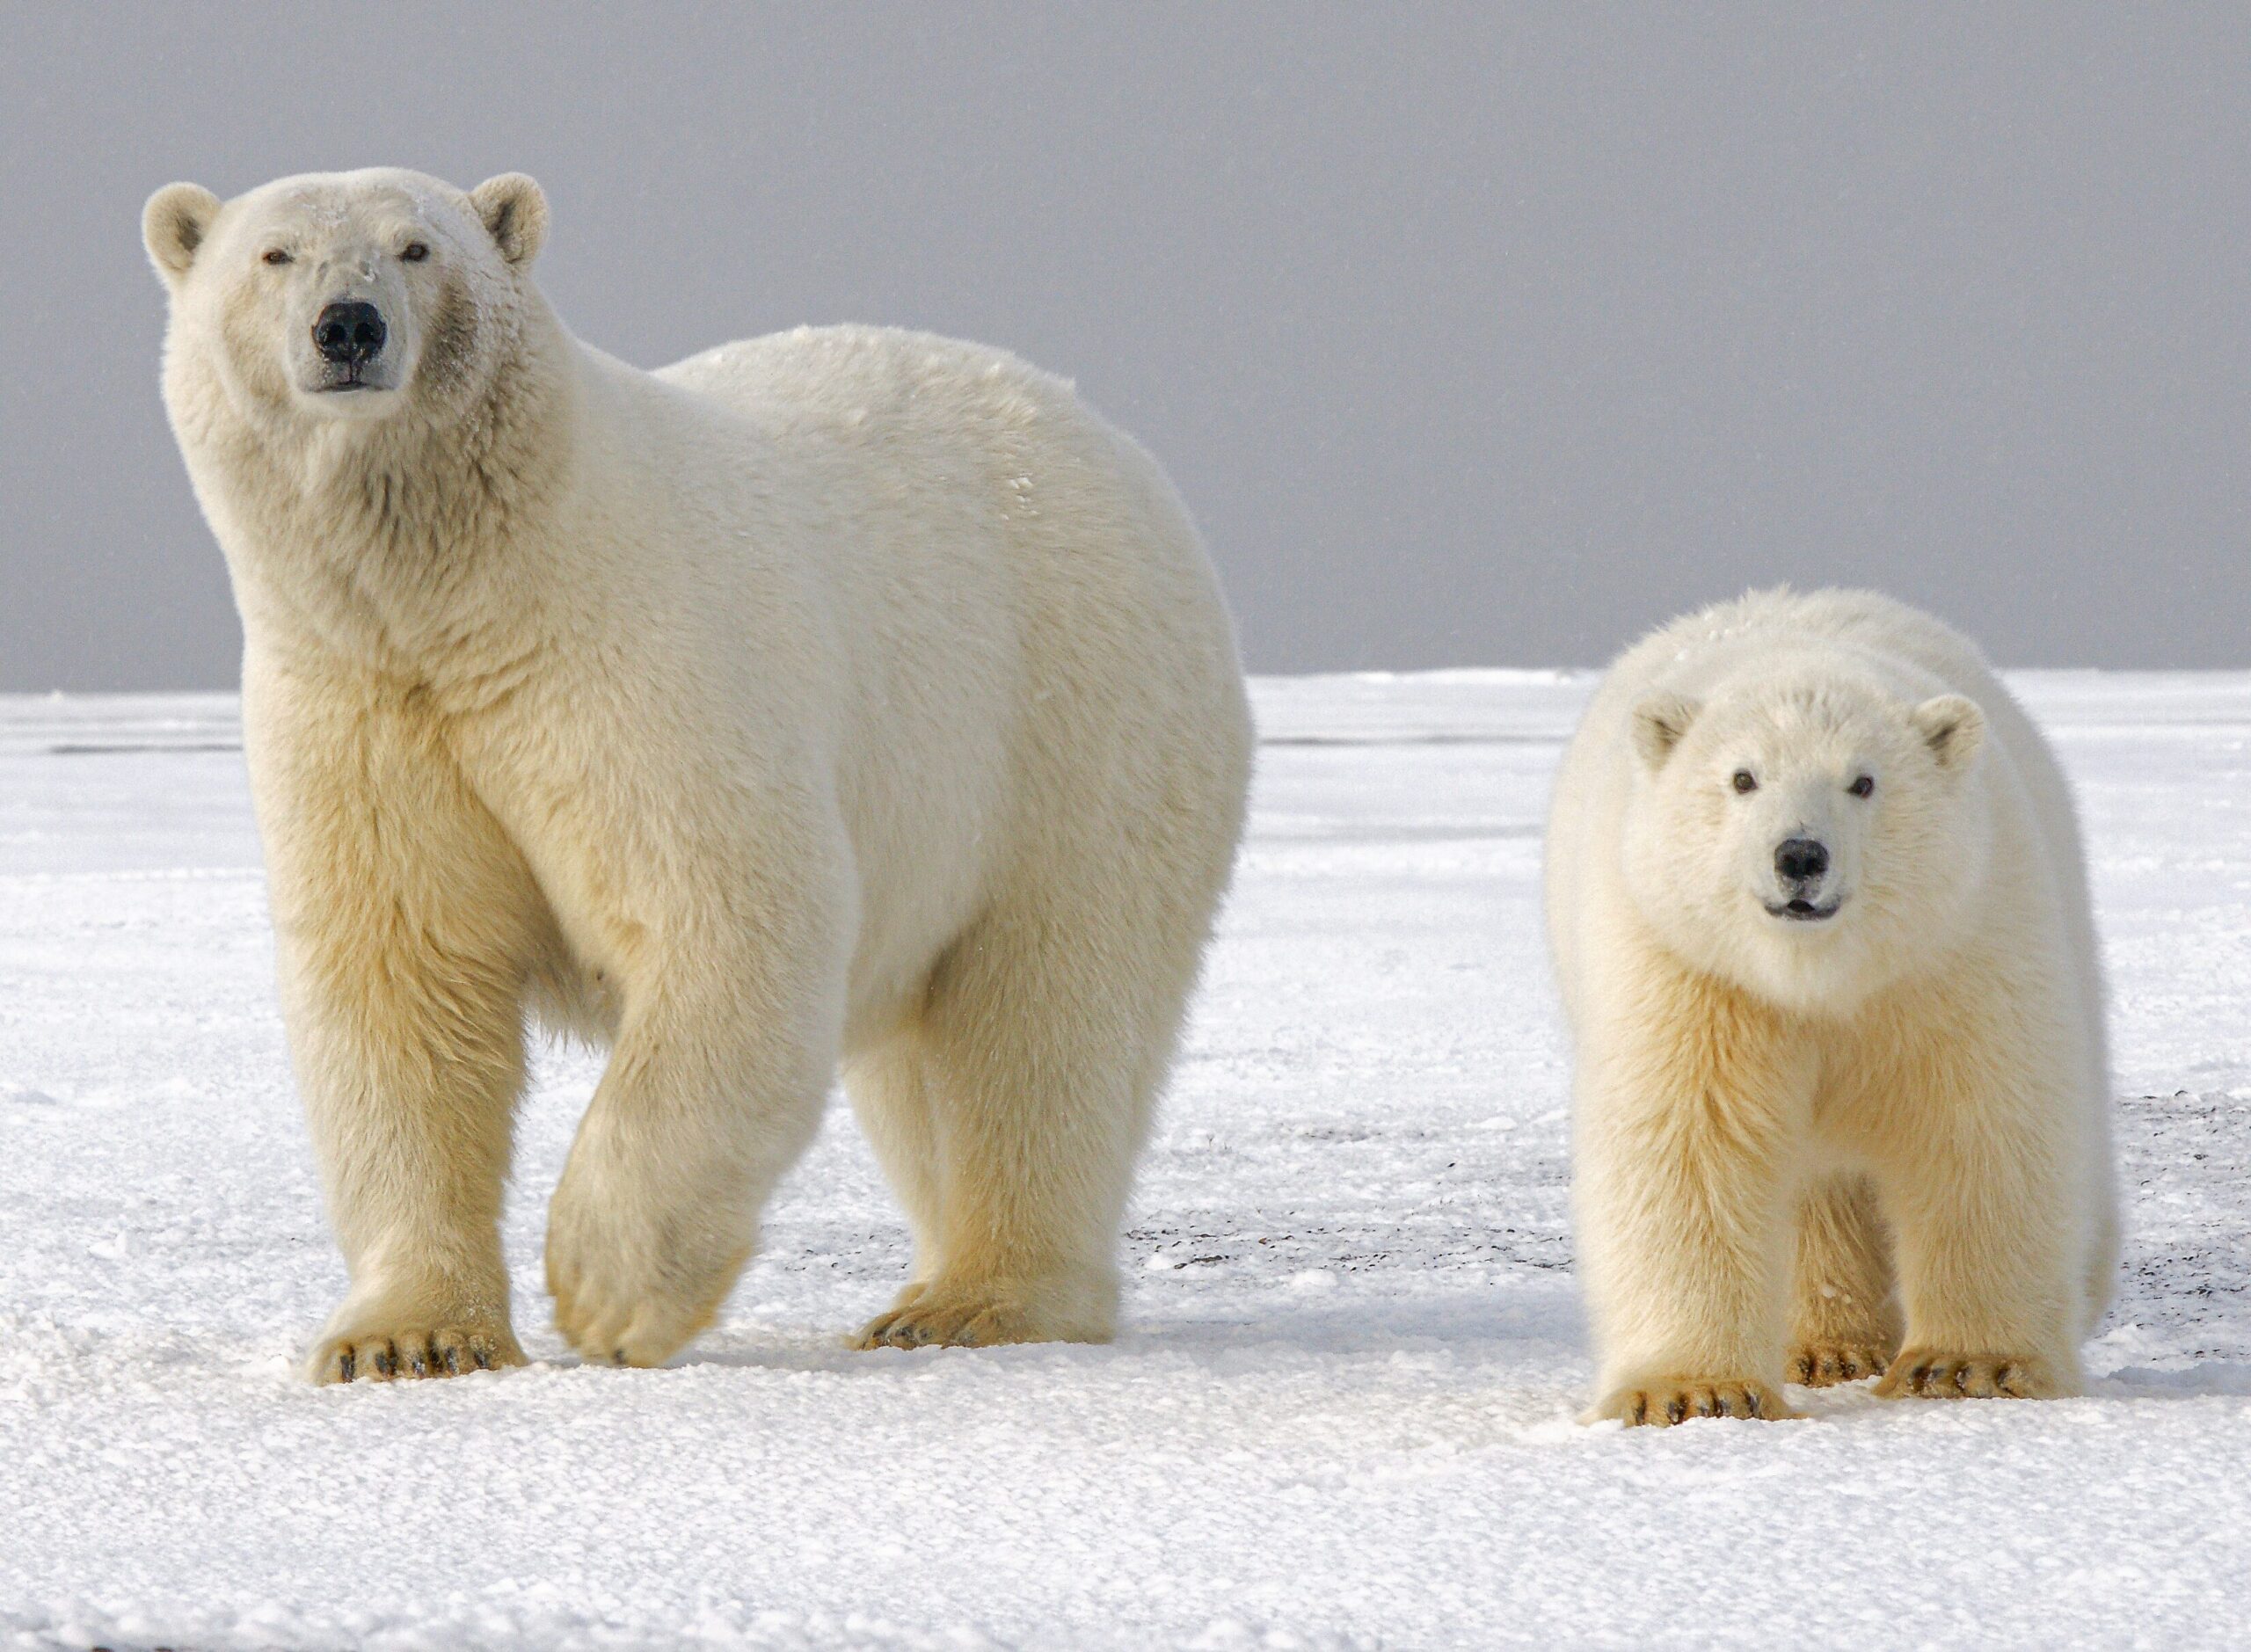 On Thin Ice: Polar Bears in a Changing Climate